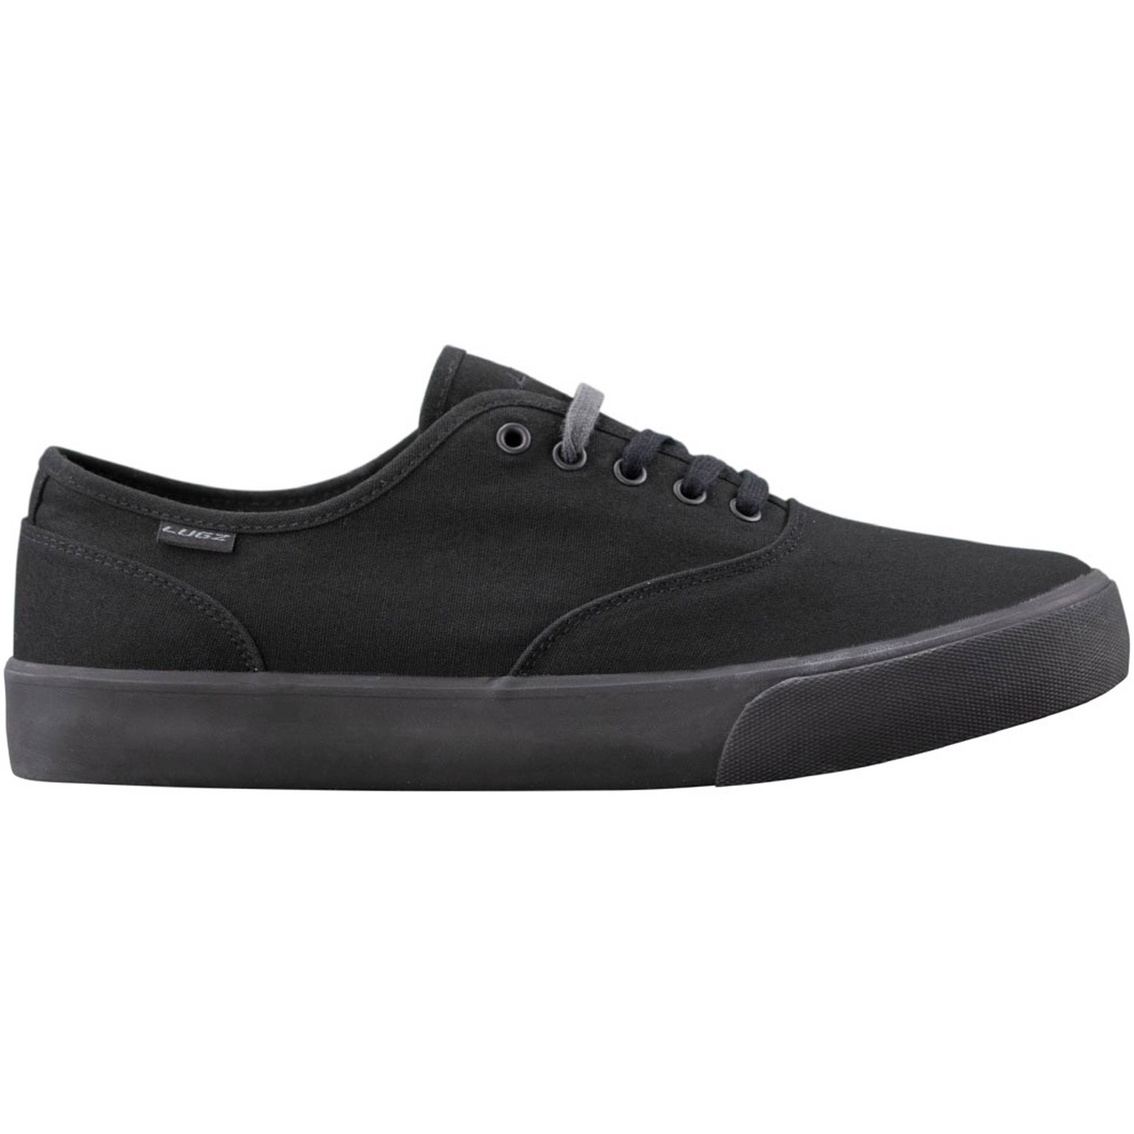 Lugz Wide Lear Sneakers - Image 2 of 7